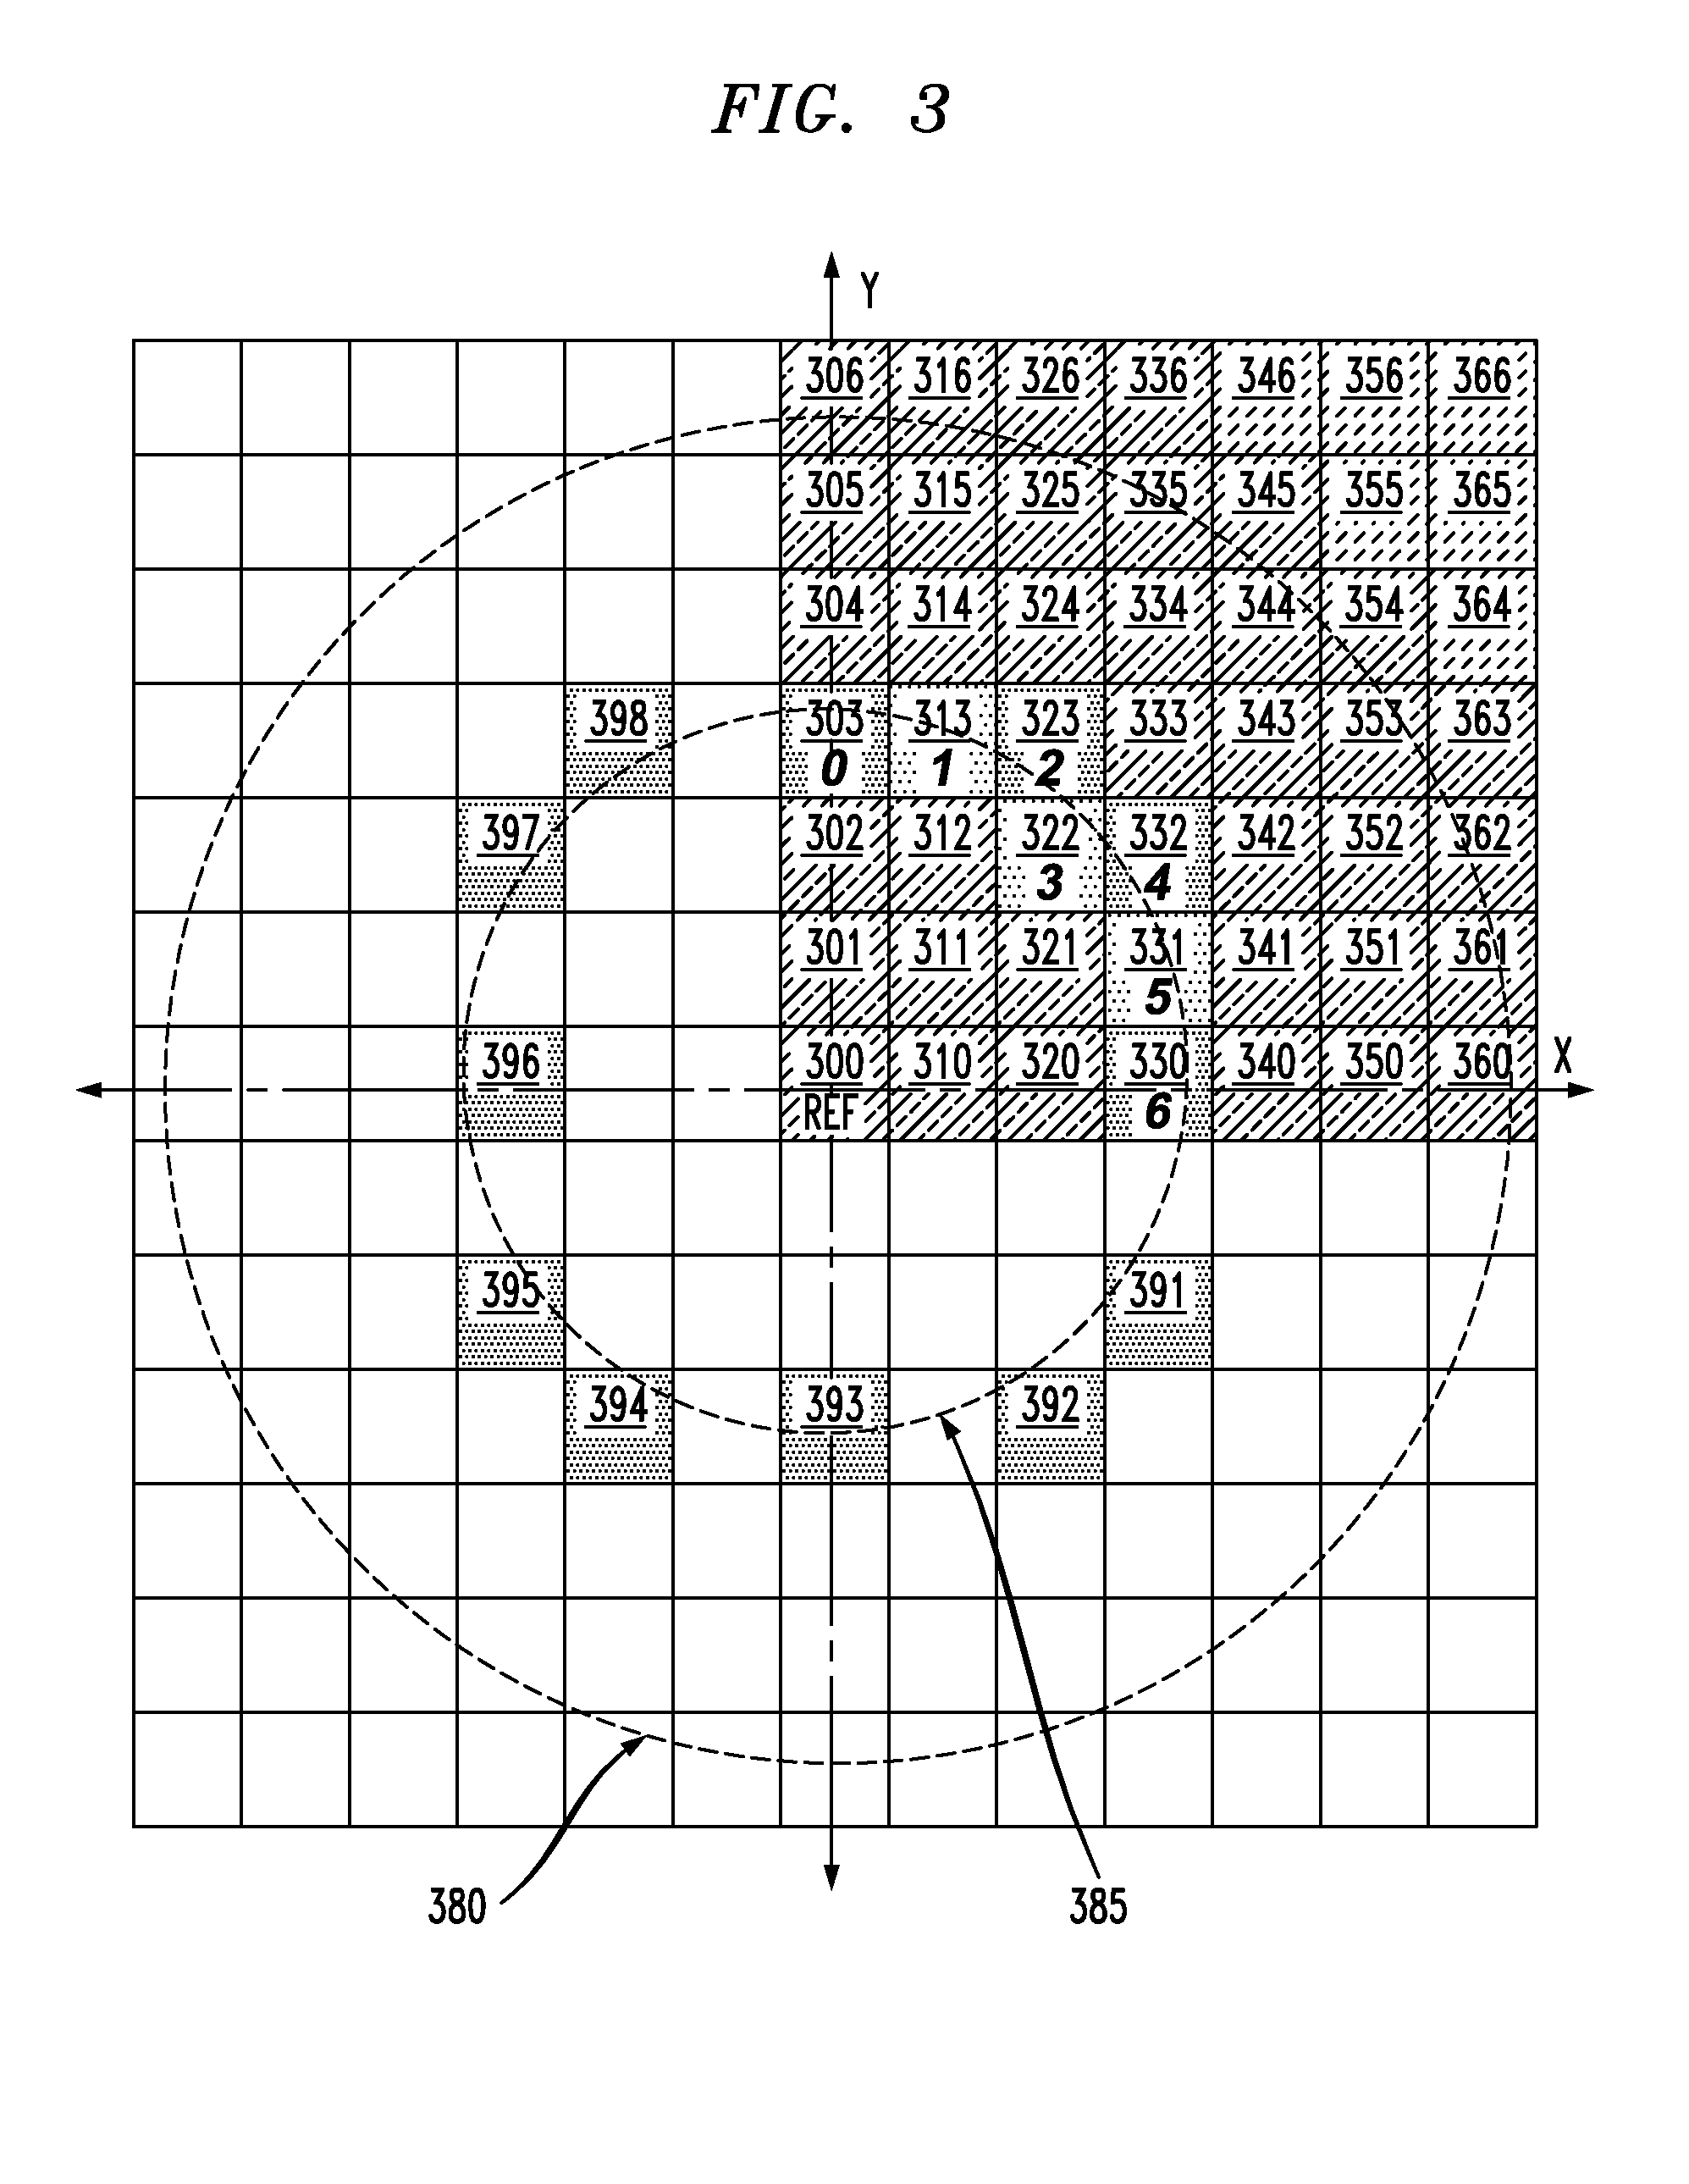 Distributing N-Body Computation Based on Surface Intersections